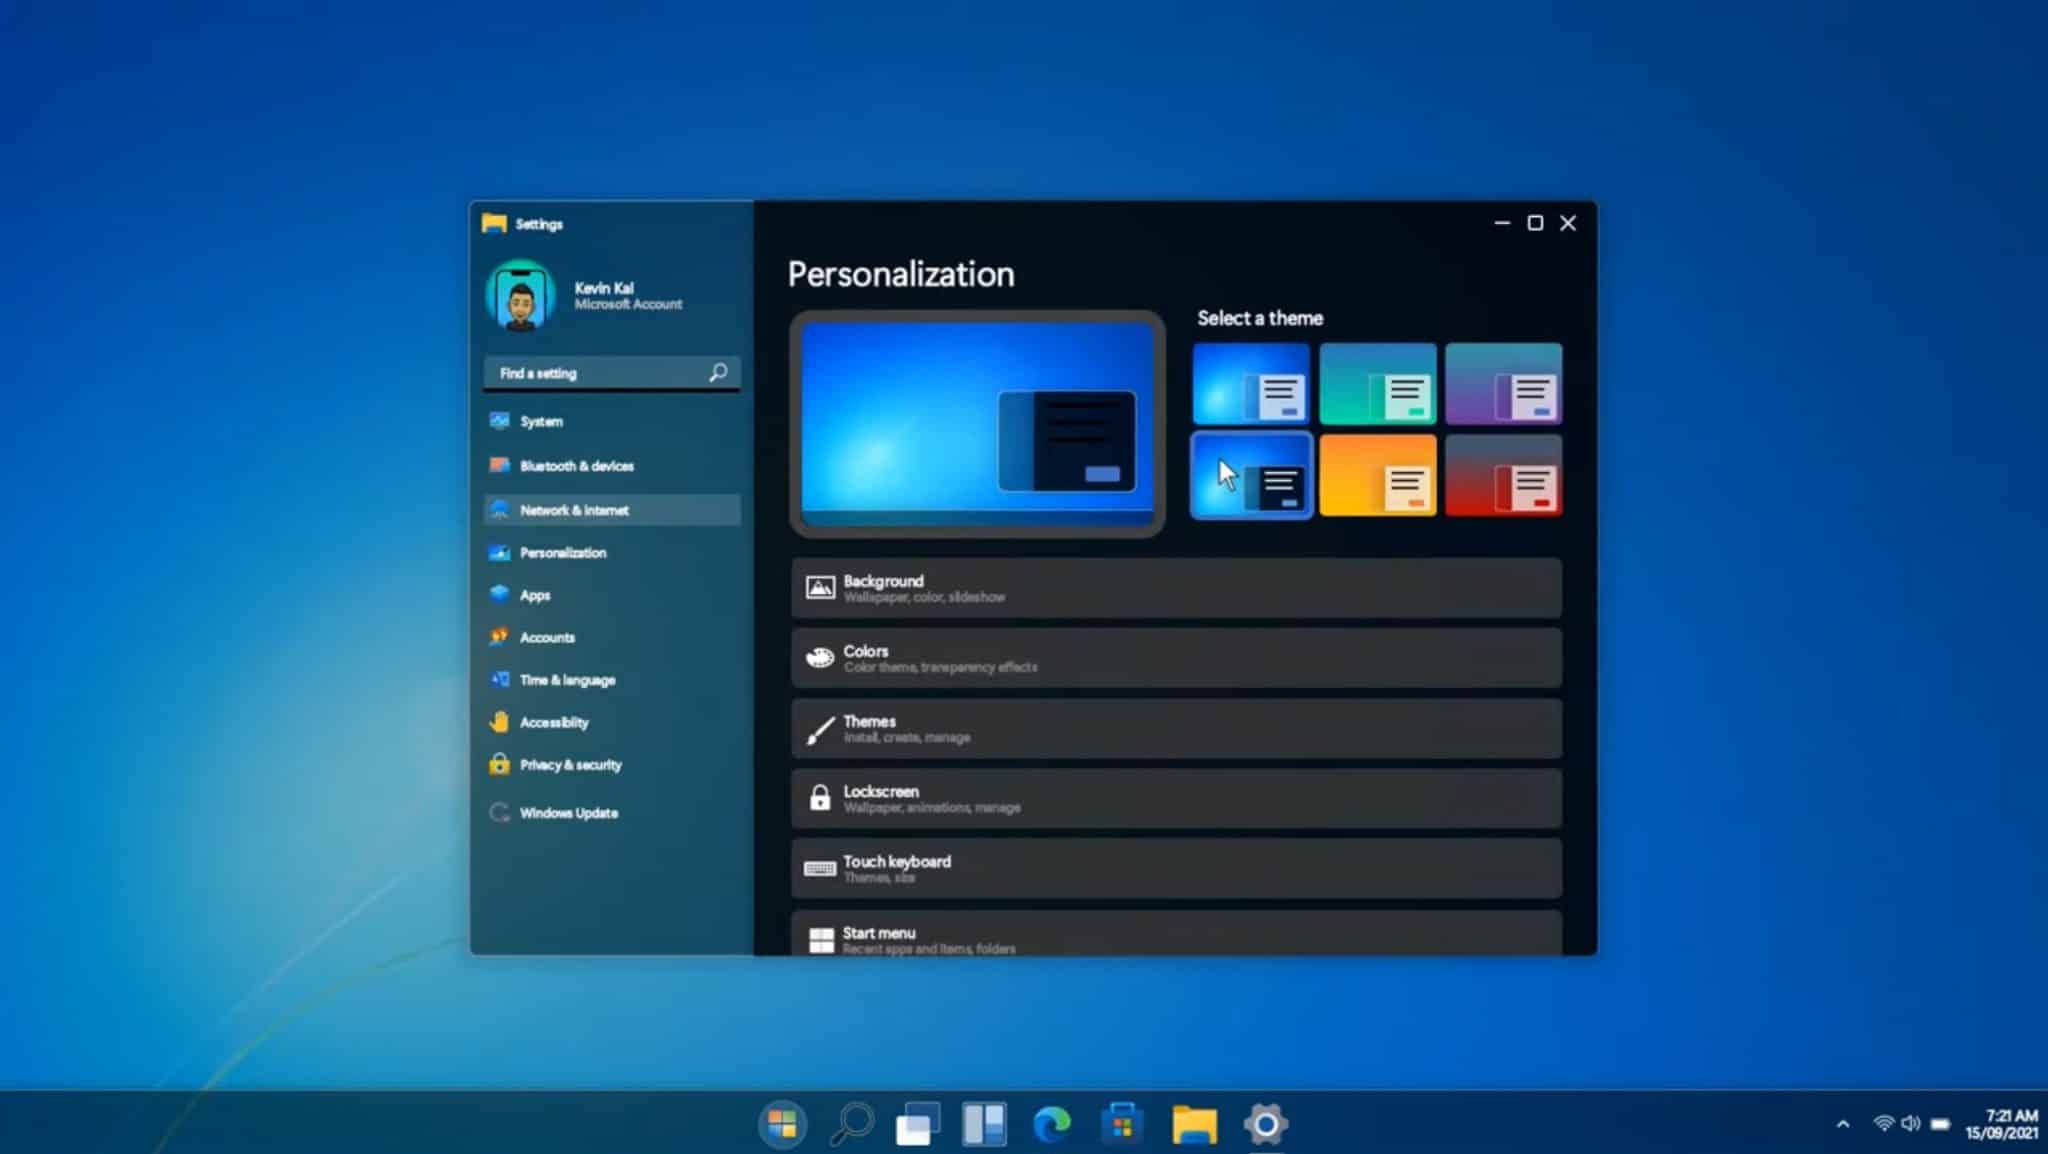 Windows 7 2021 Edition brings in elements of Windows 11